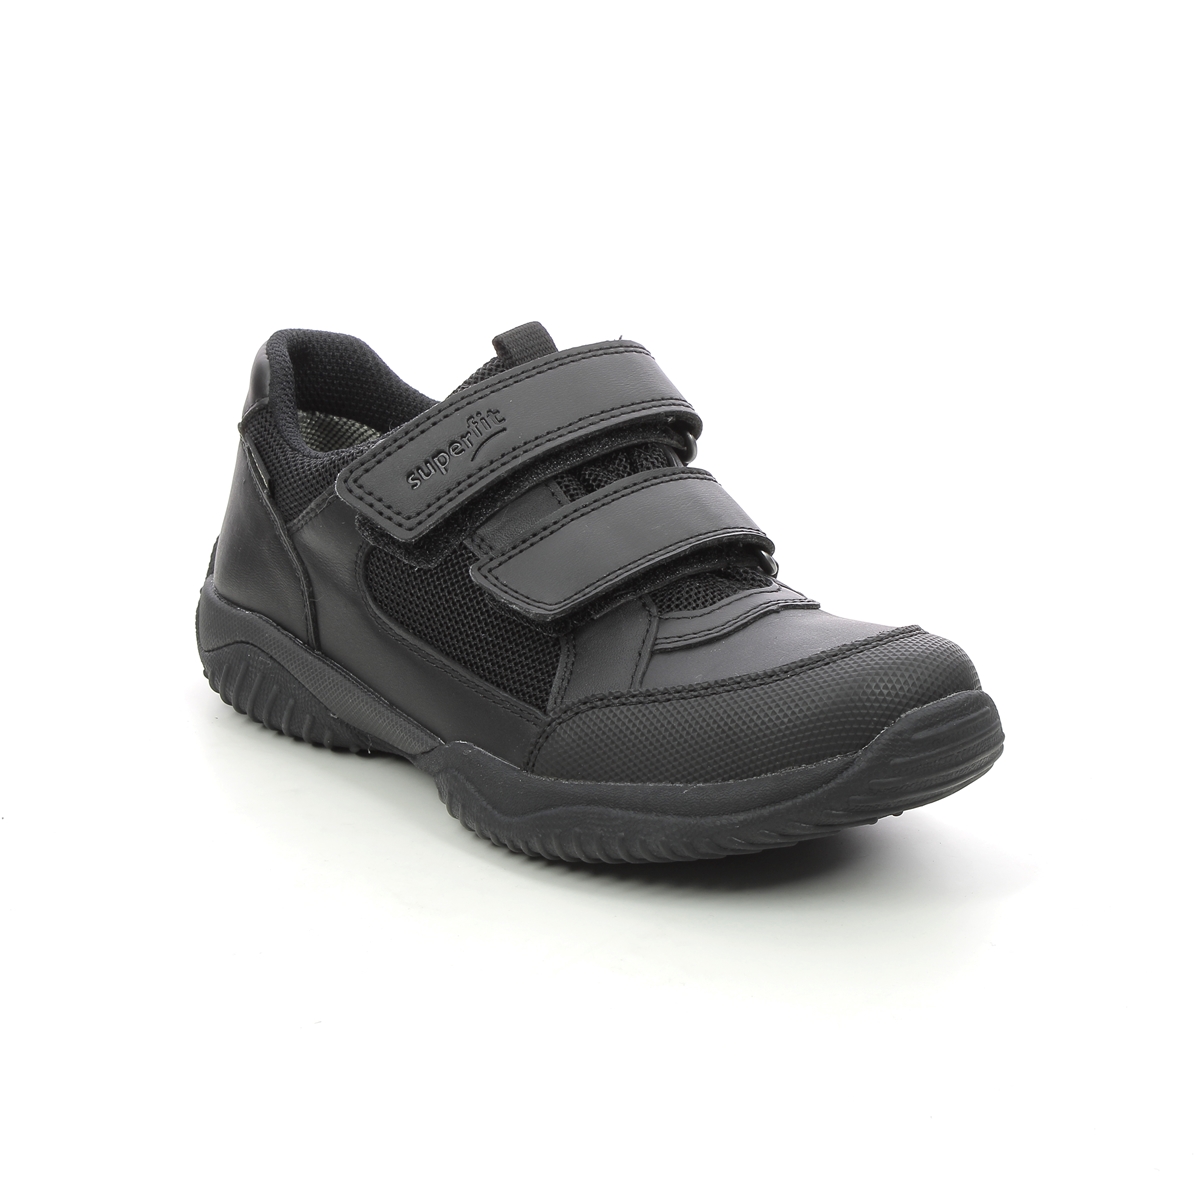 Superfit Storm Shoe Gtx Black Leather Kids Boys Casual Shoes 1009382-0000 In Size 35 In Plain Black Leather For kids